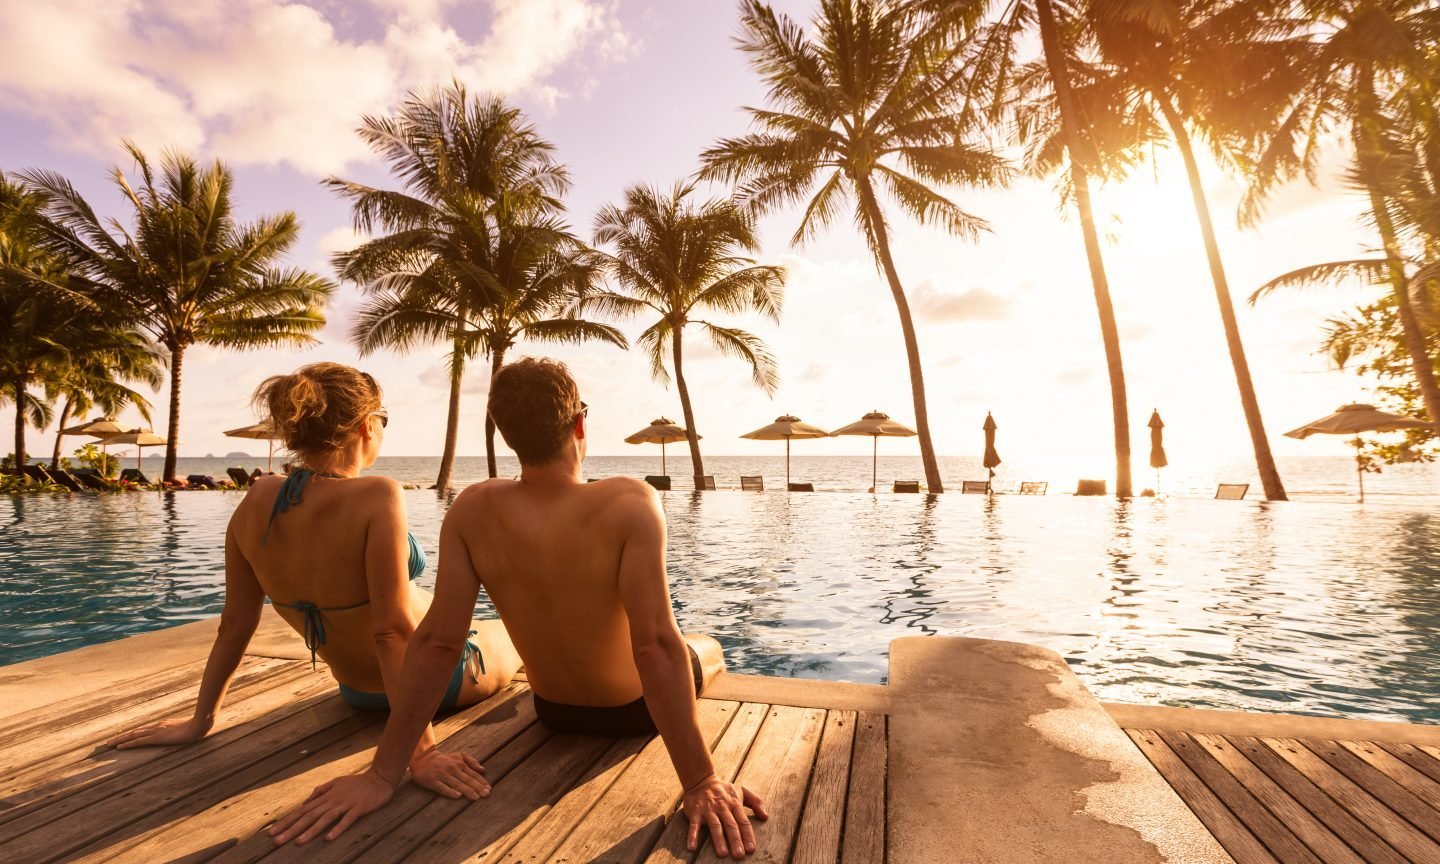 Cash Back vs. Travel: Which Rewards are Better for Me?